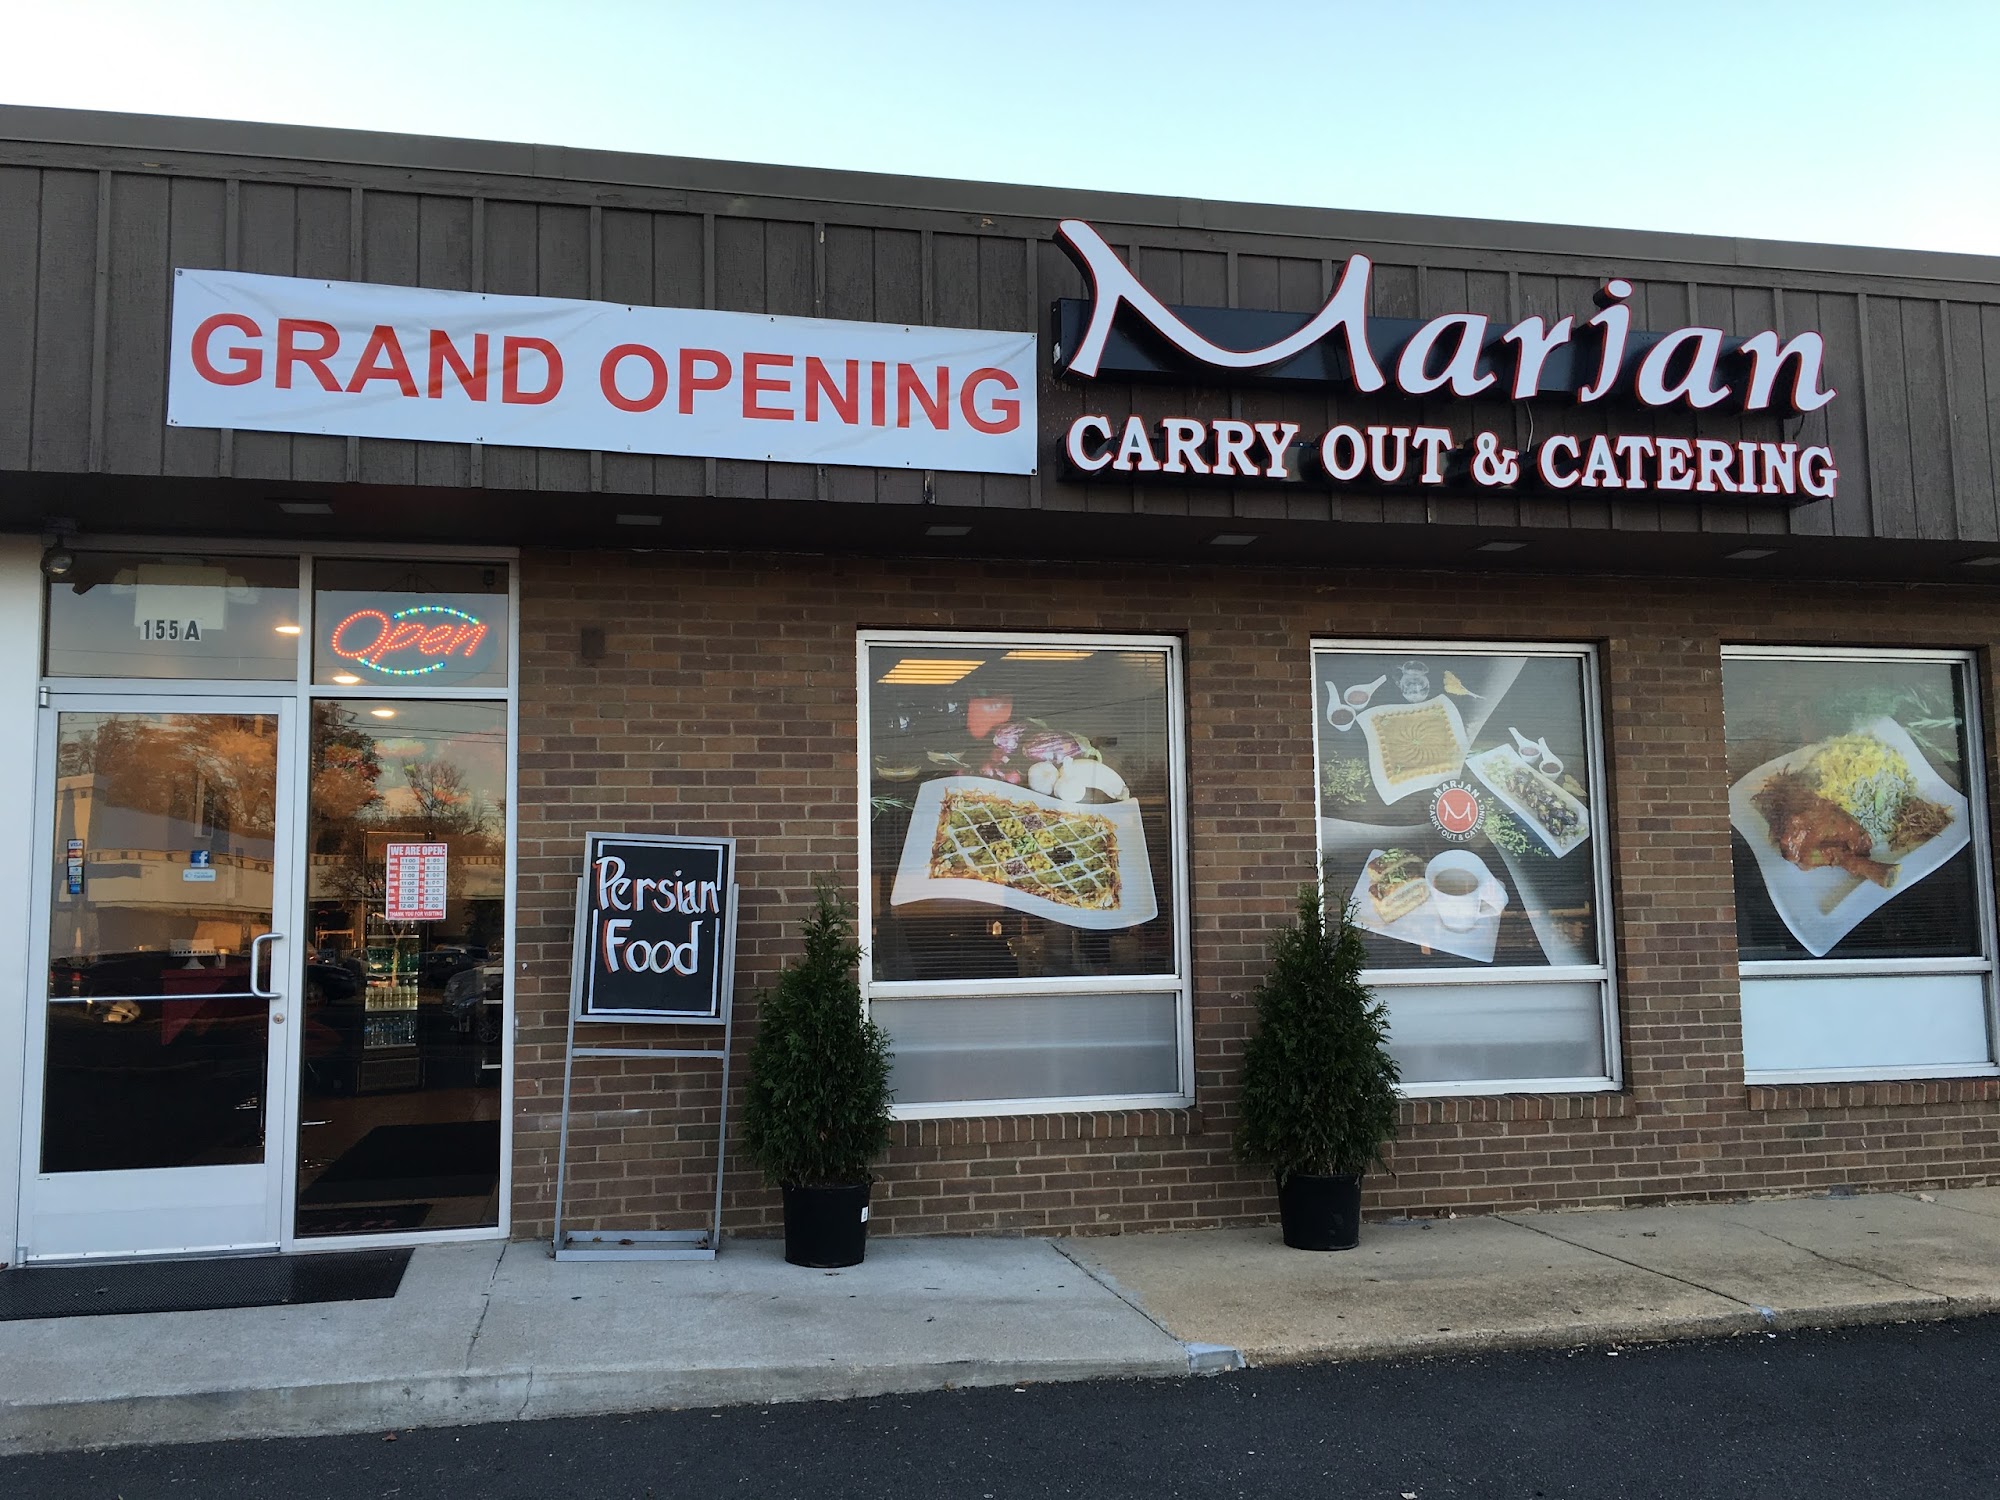 Marjan Carryout & Catering